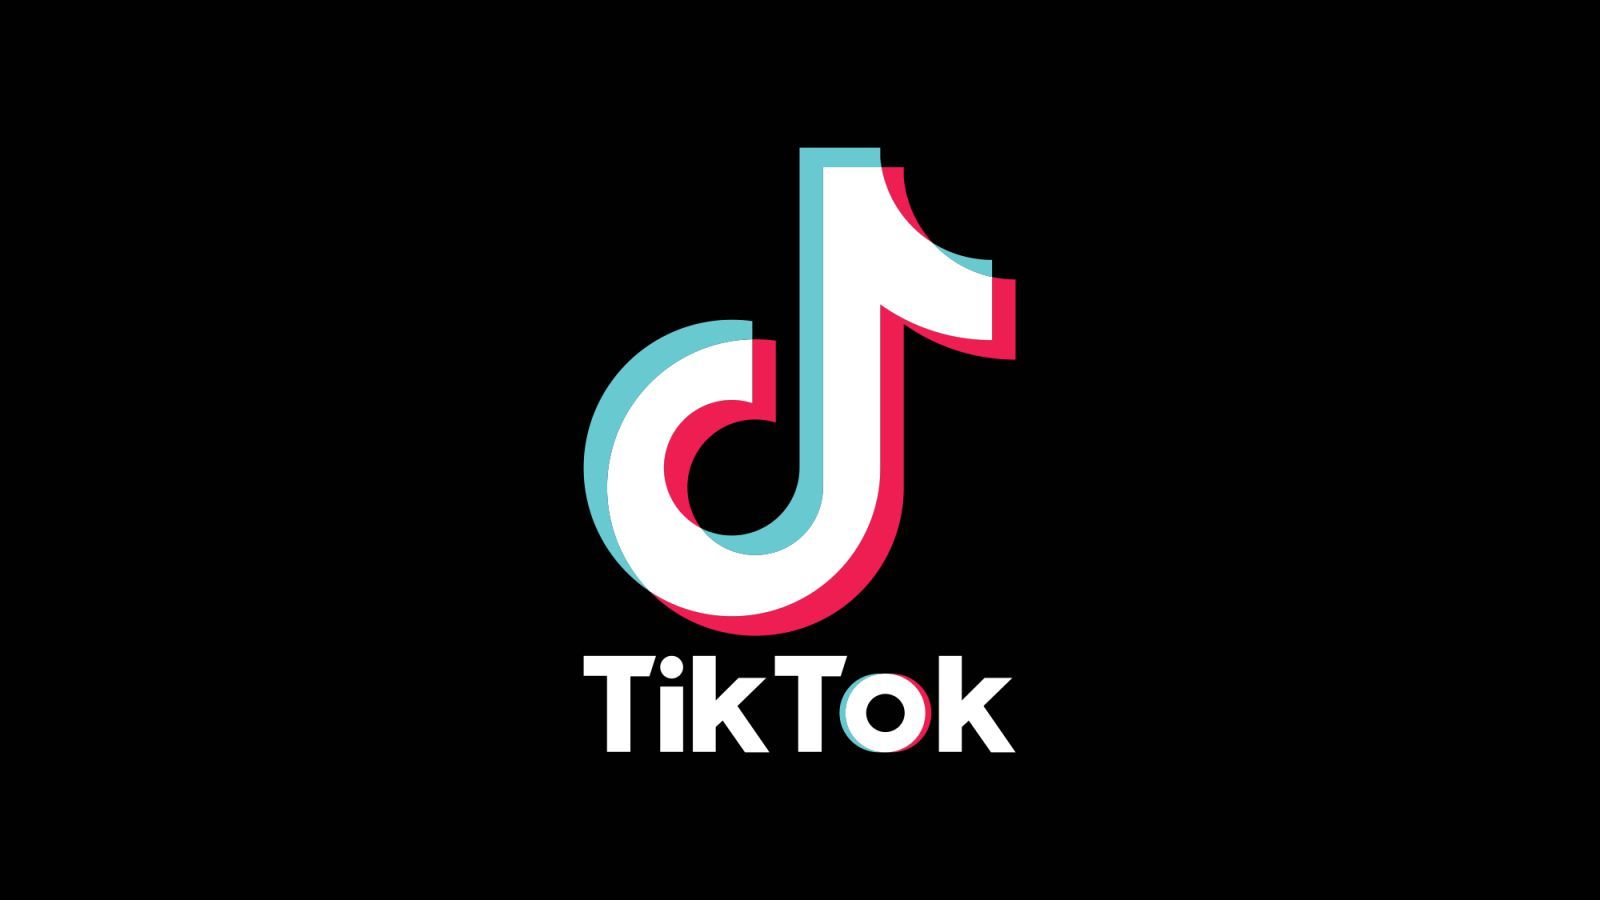 TikTok is being removed from the app store